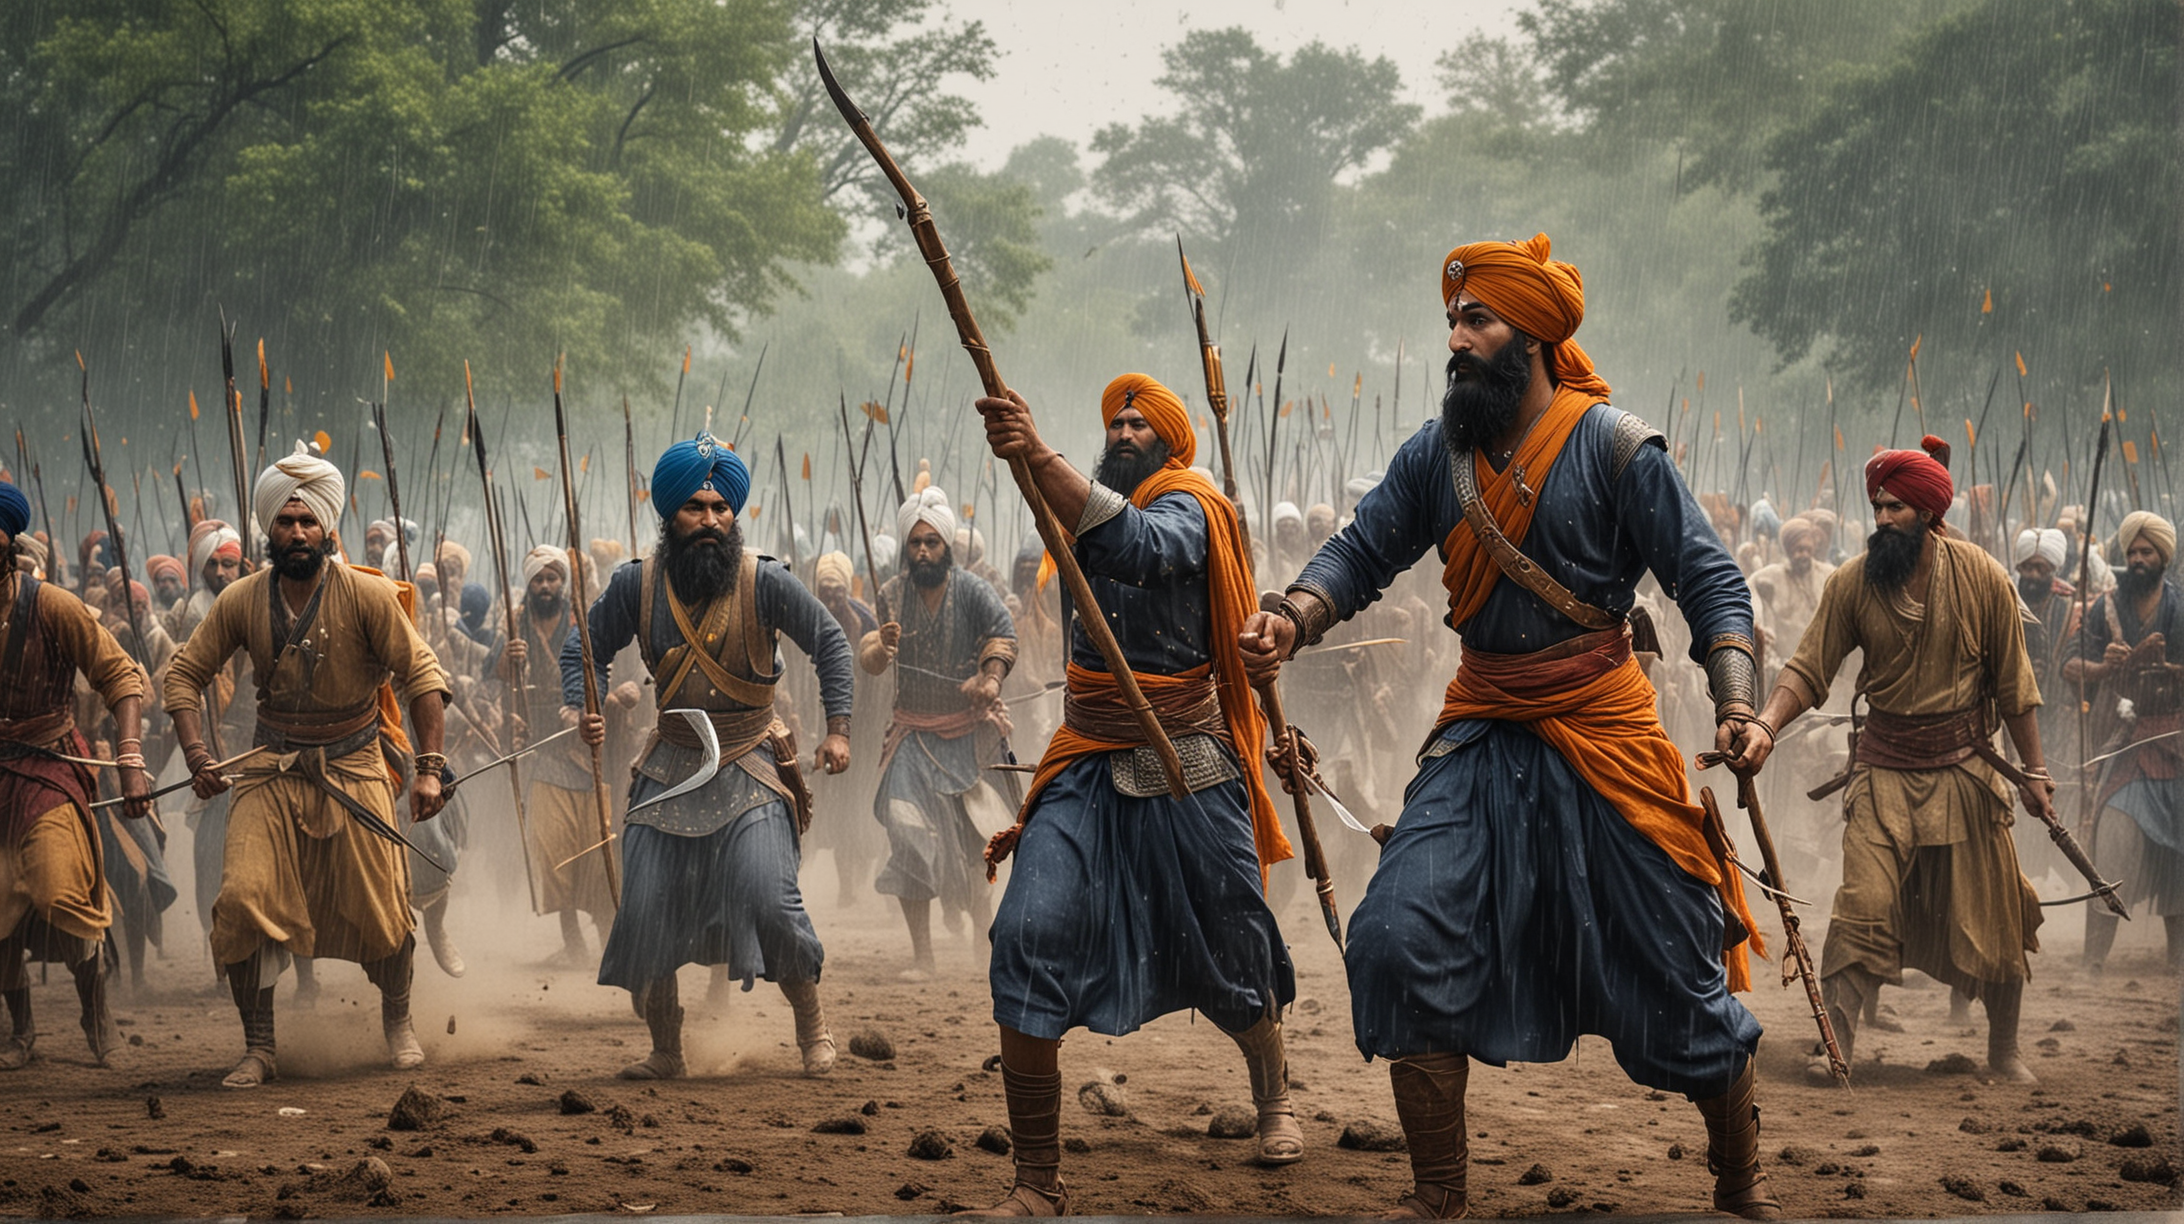 Sikh Warriors Raining Arrows on Approaching Army in Historic Indian Battle Scene